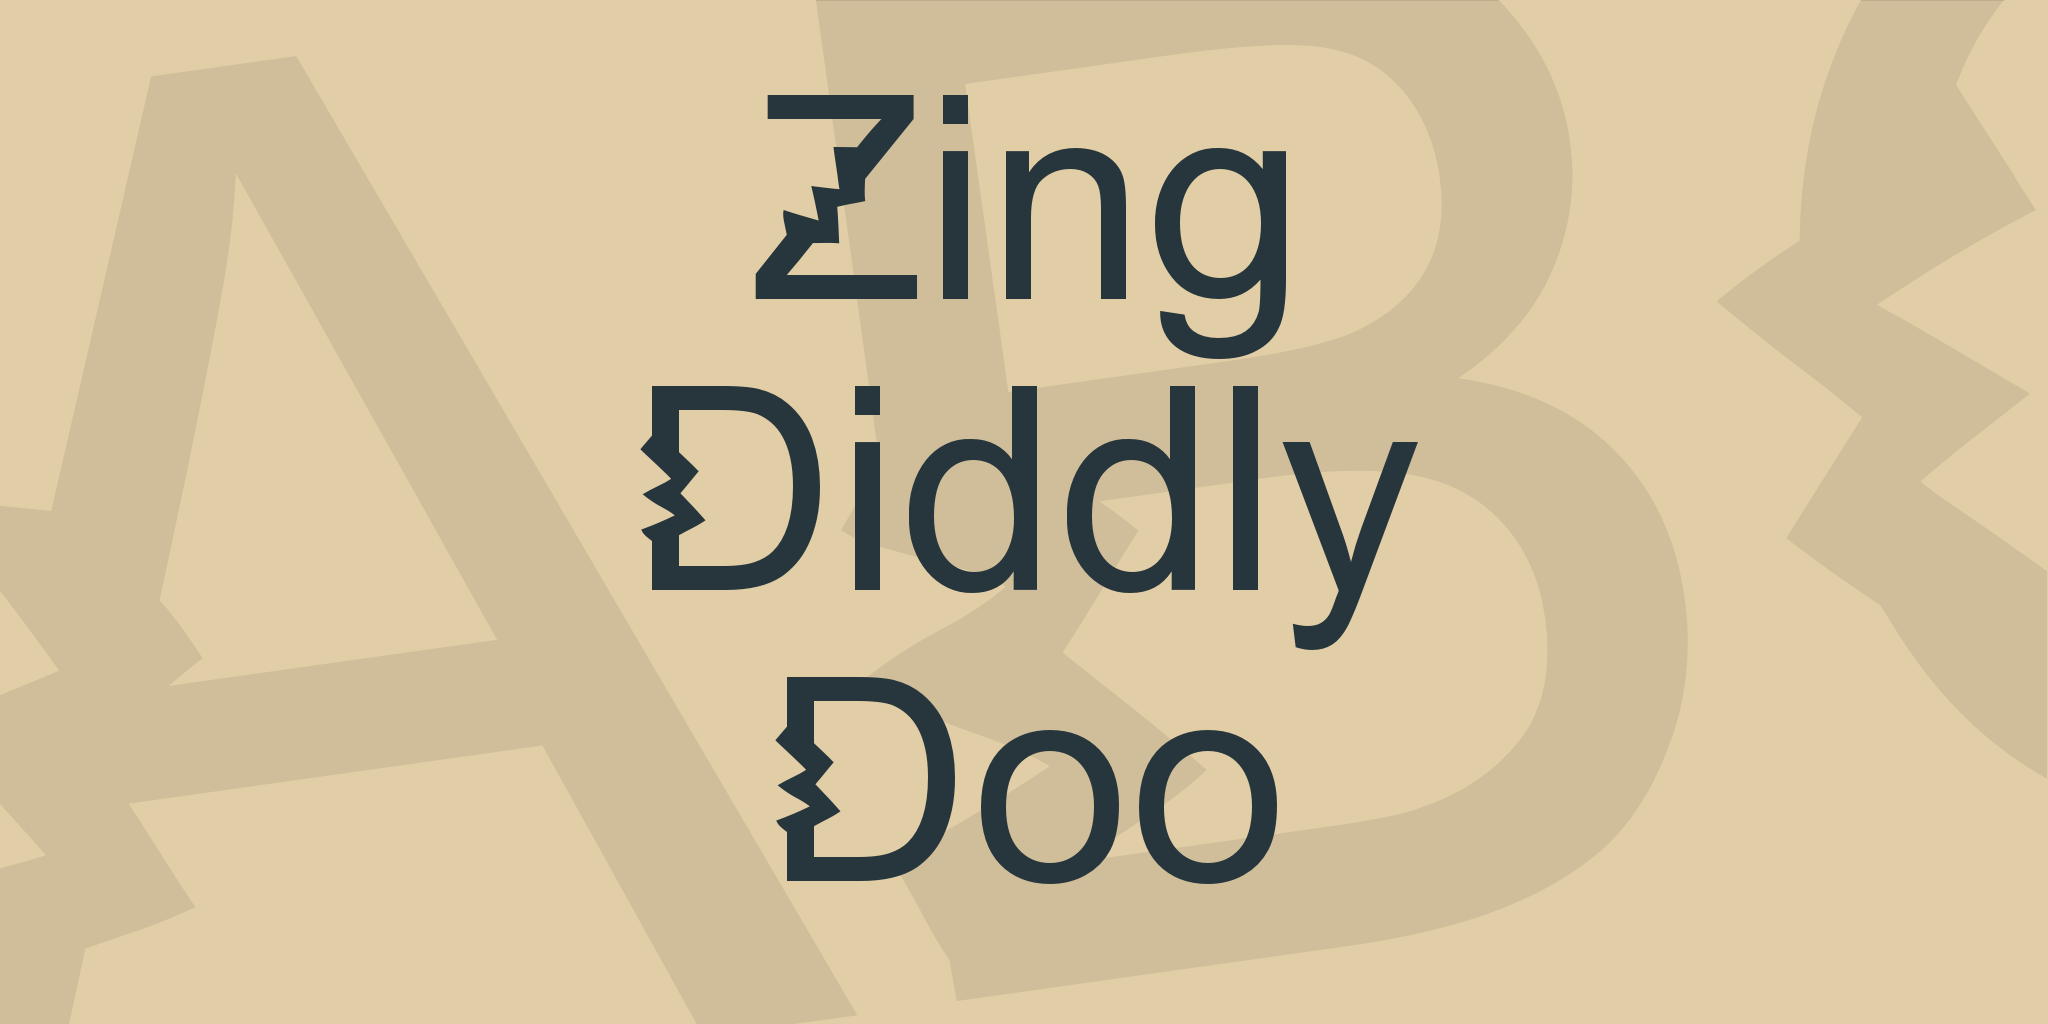 Zing Diddly Doo